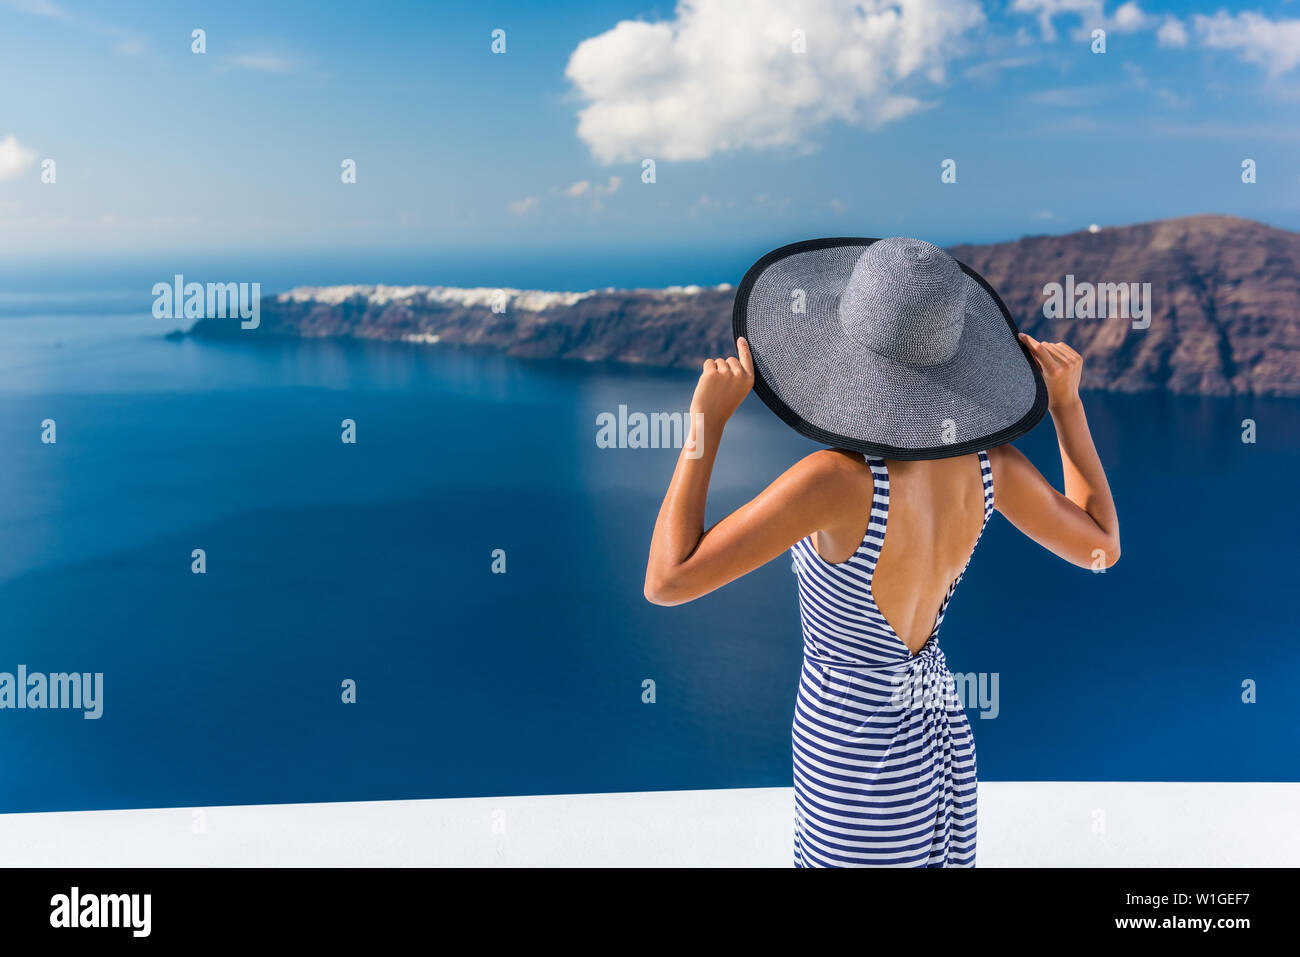 Europe summer vacation travel destination luxury living woman looking at view of Mediterranean Sea and Santorini island Oia village. Elegant tourist lady in fashion back dress and floppy sun hat. Stock Photo